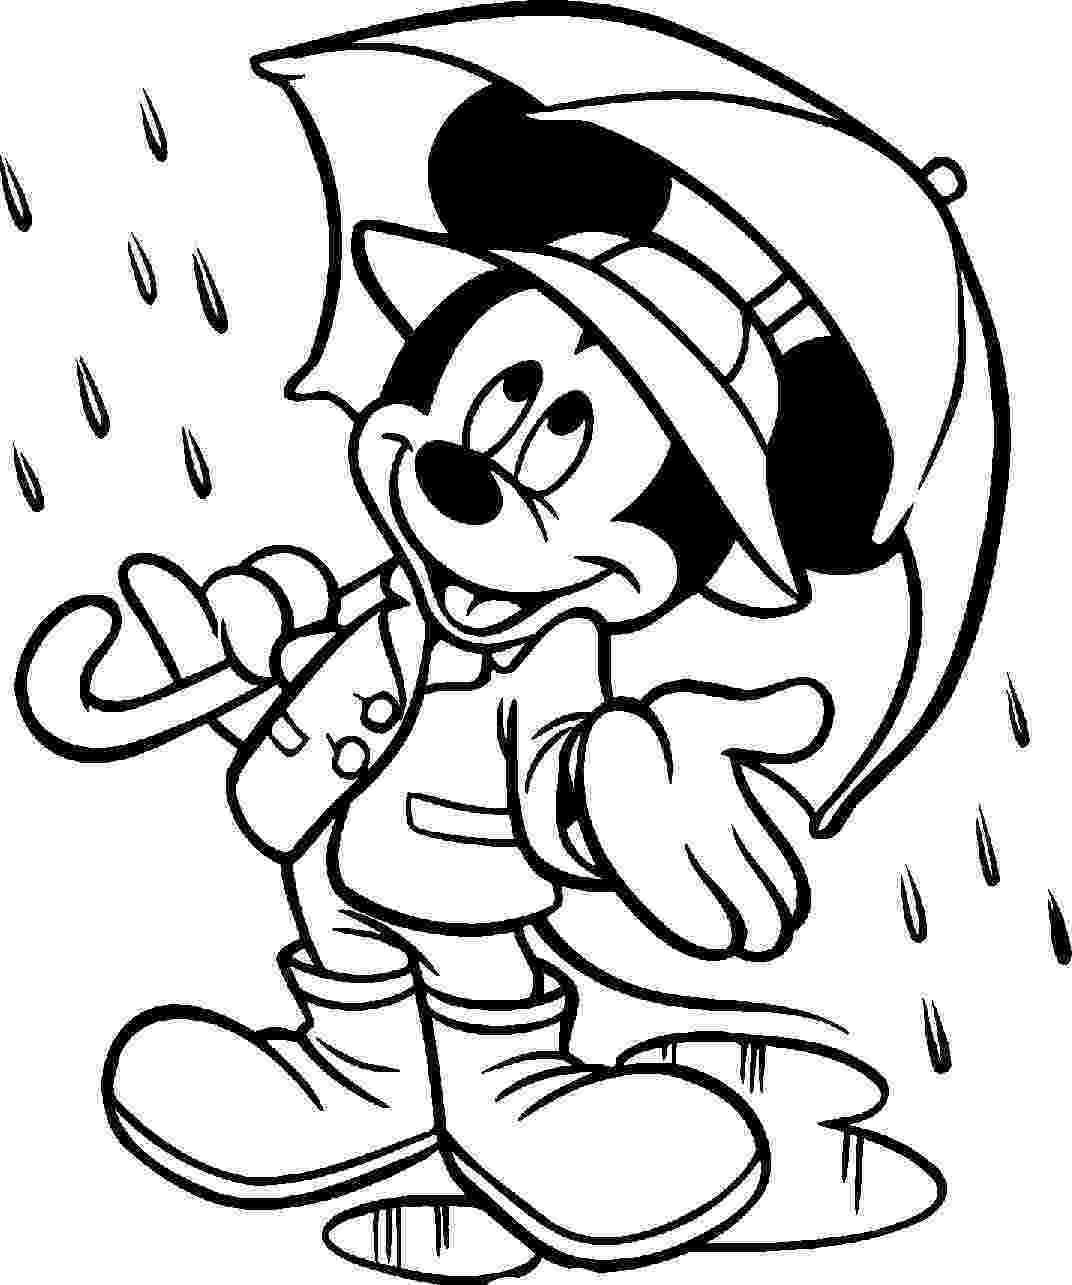 colouring pages of mickey mouse and minnie mickey mouse colouring page mickey minnie mouse mouse of colouring pages minnie mickey and 